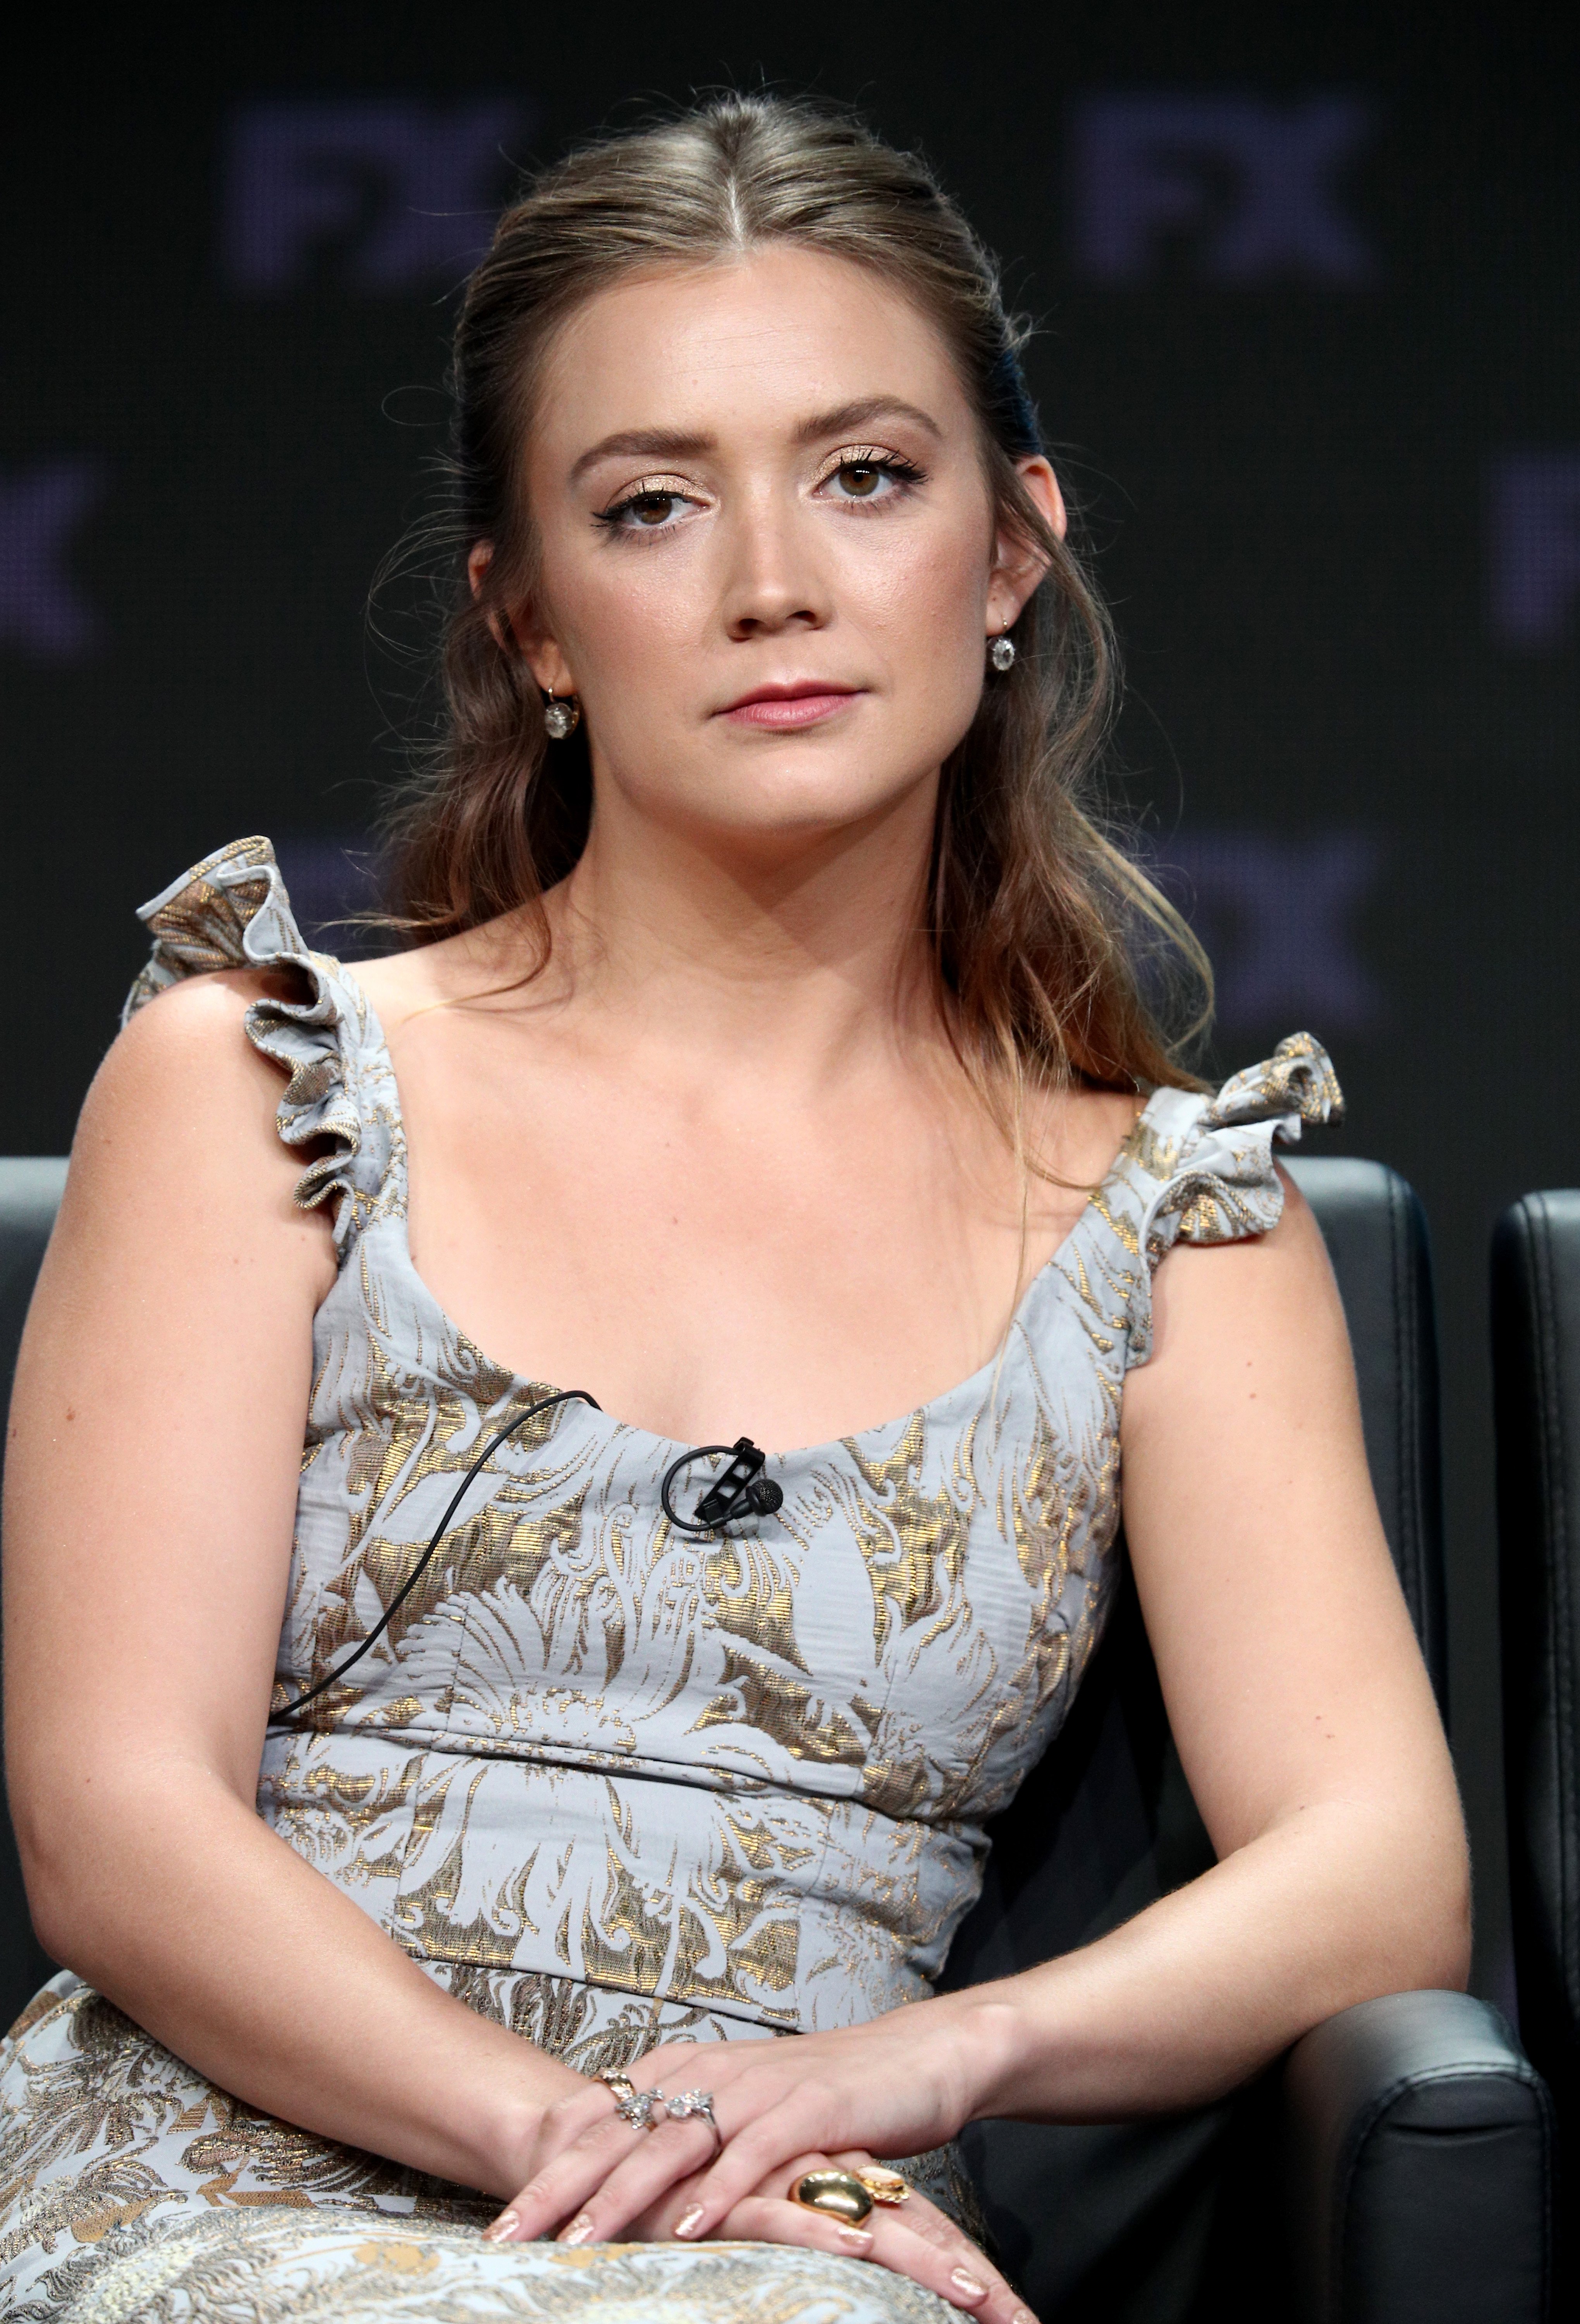 Billie Lourd speats at an "American Horror" panel in Beverly Hills, California on August 3, 2018 | Photo: Getty Images